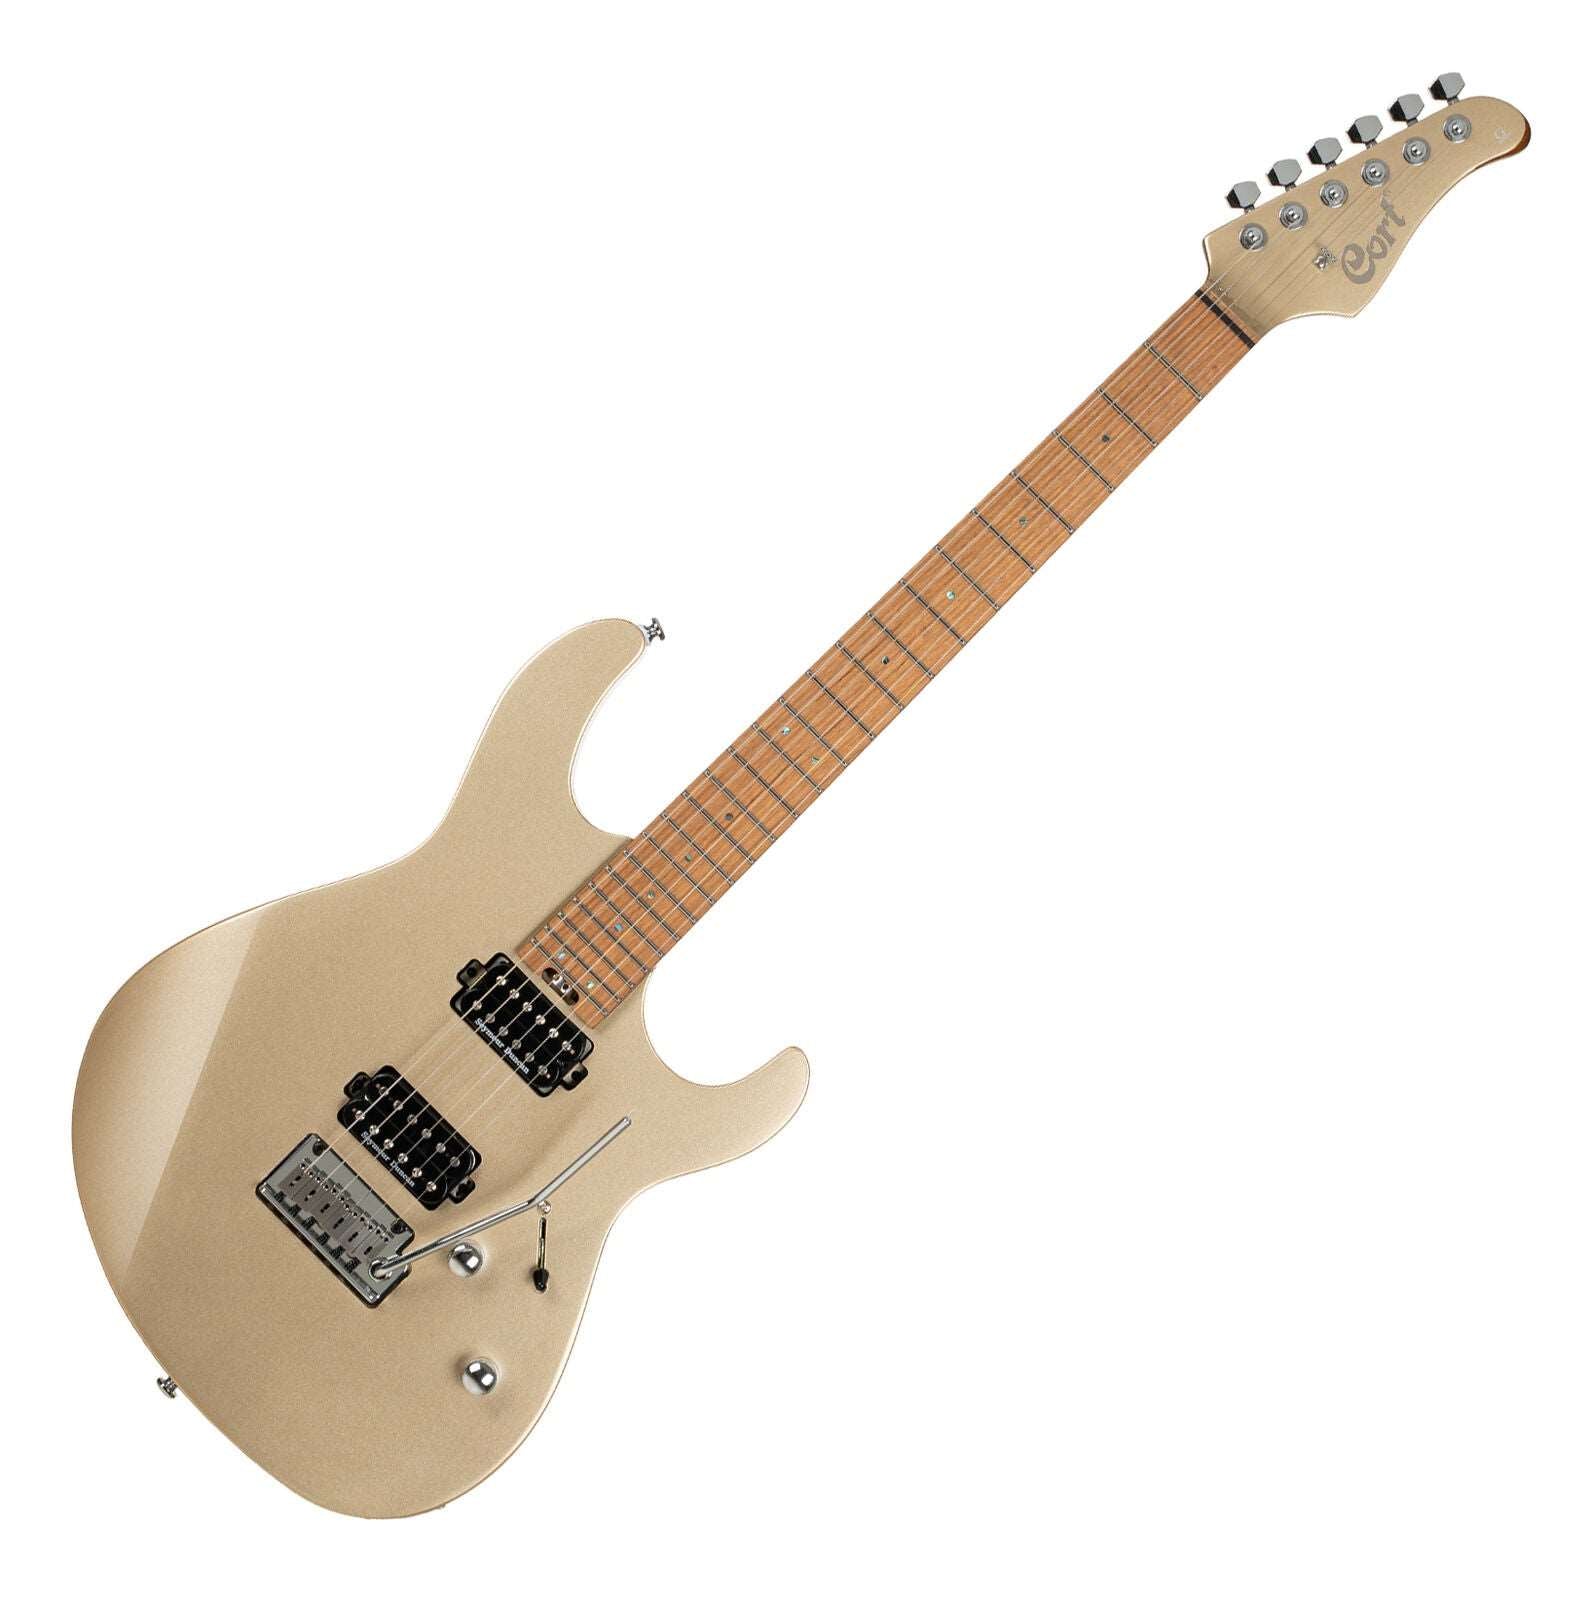 Cort G300 Pro Electric Guitar with Bag - Metallic Gold